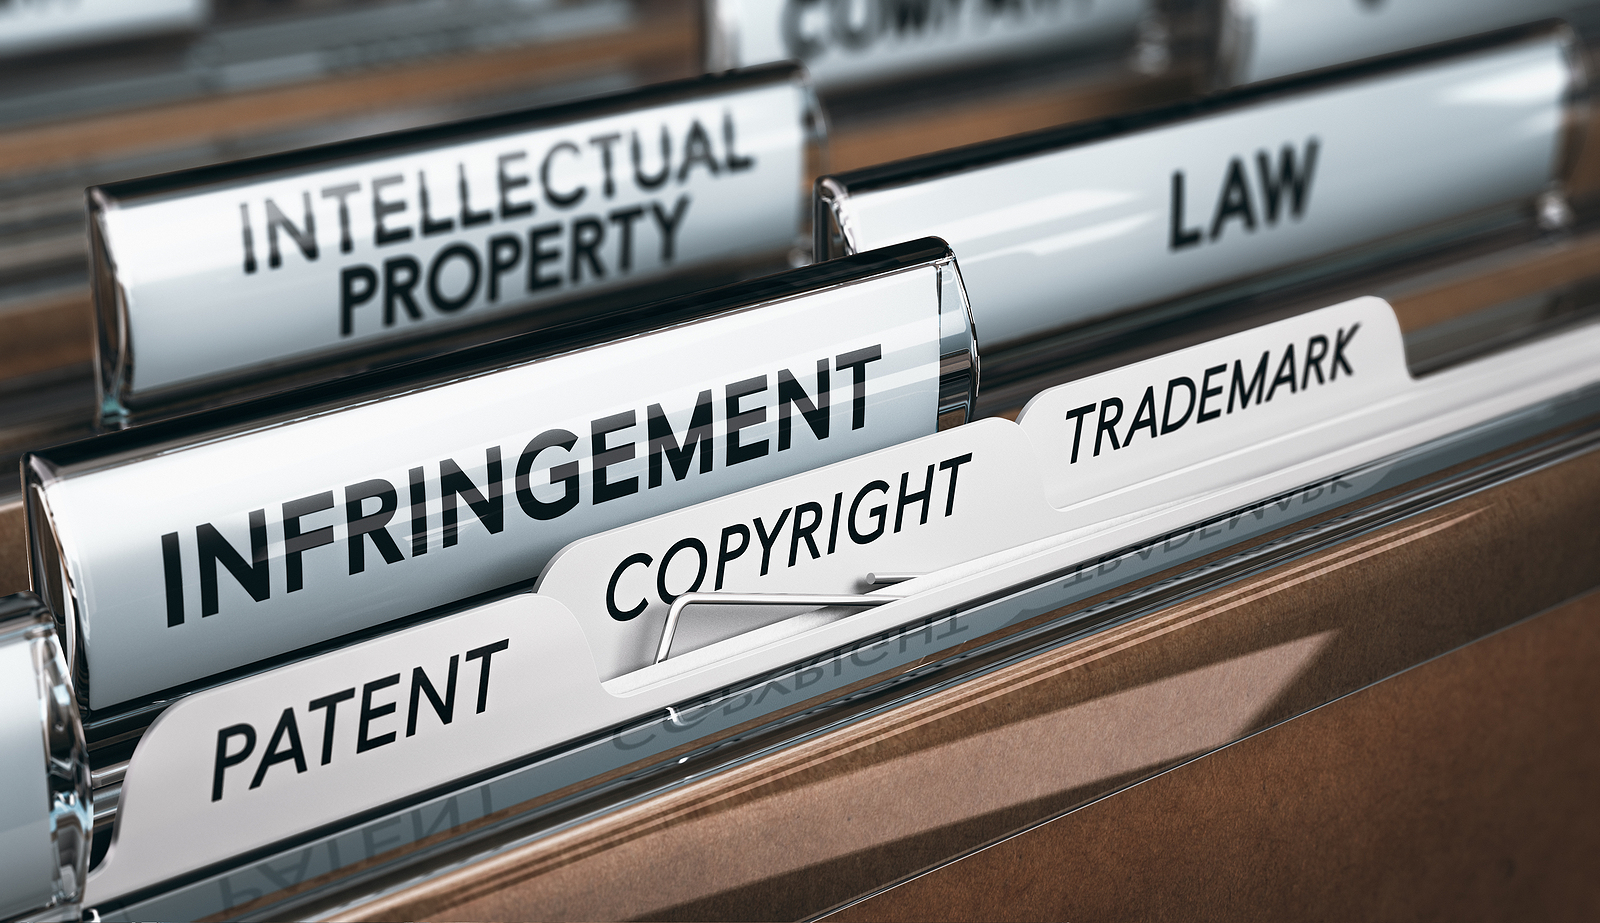 File folders for infringement, including patent, copyright, and trademark.